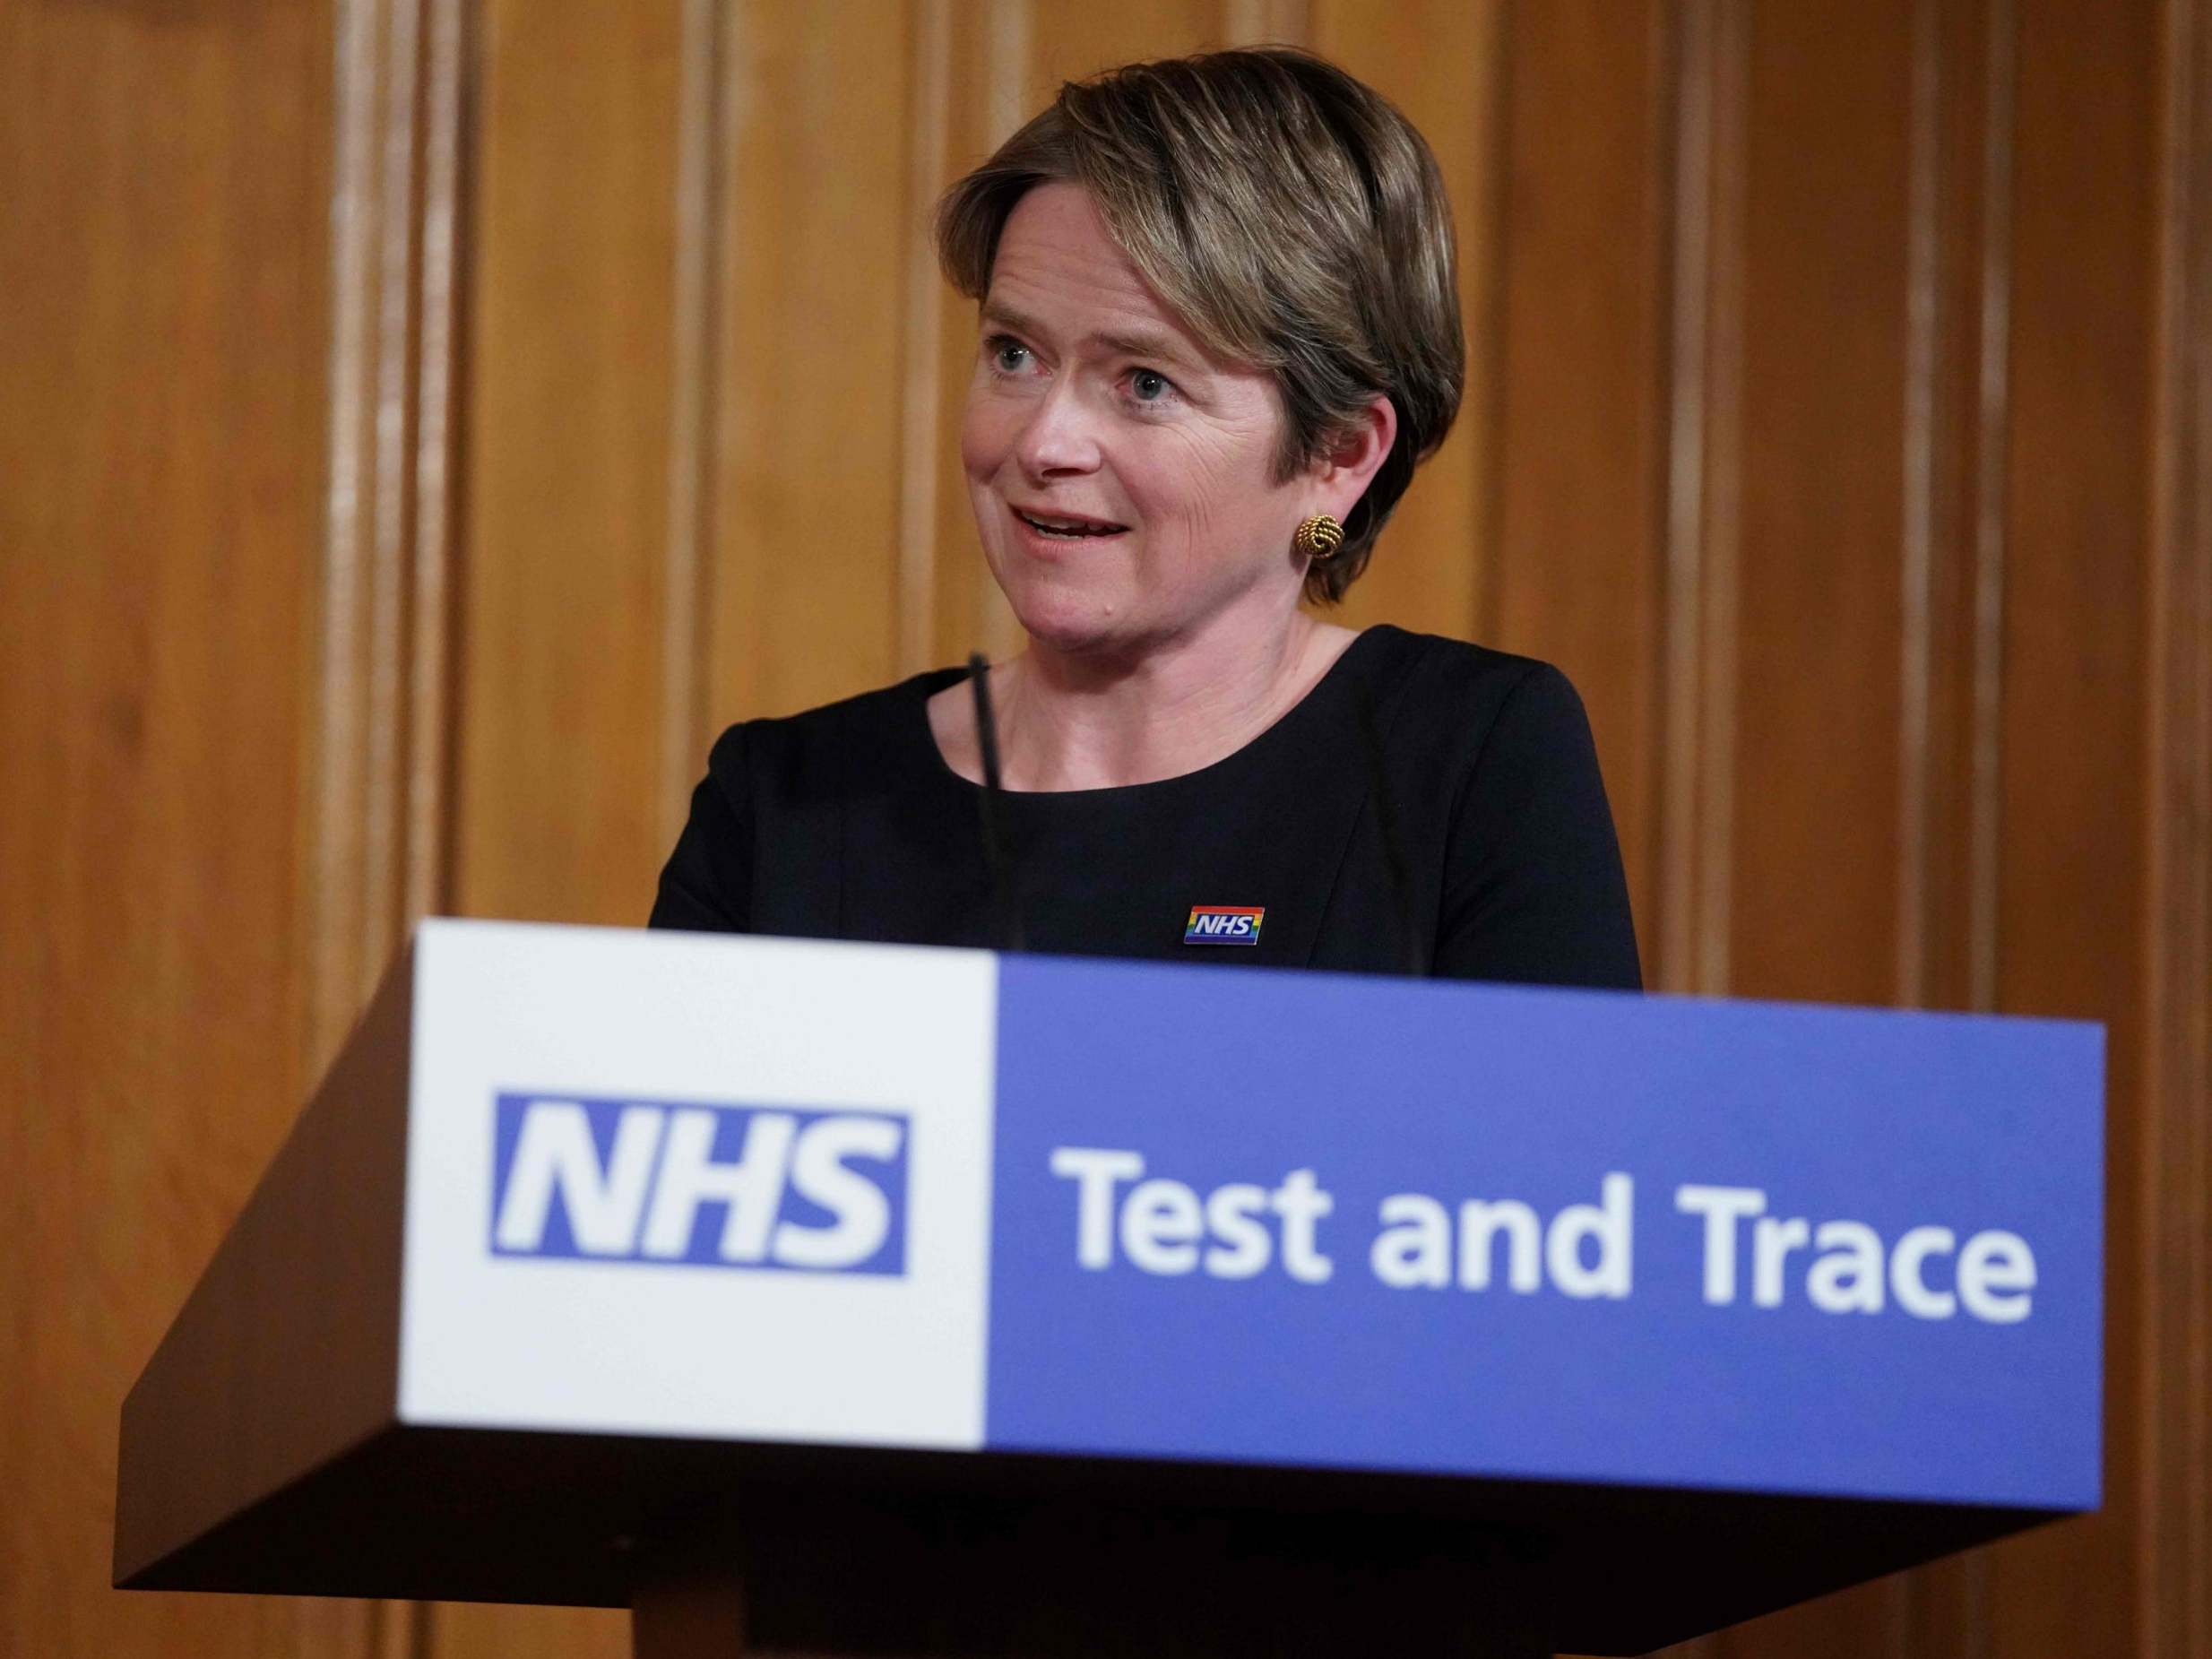 Dido Harding heads up the NHS Test and Trace programme